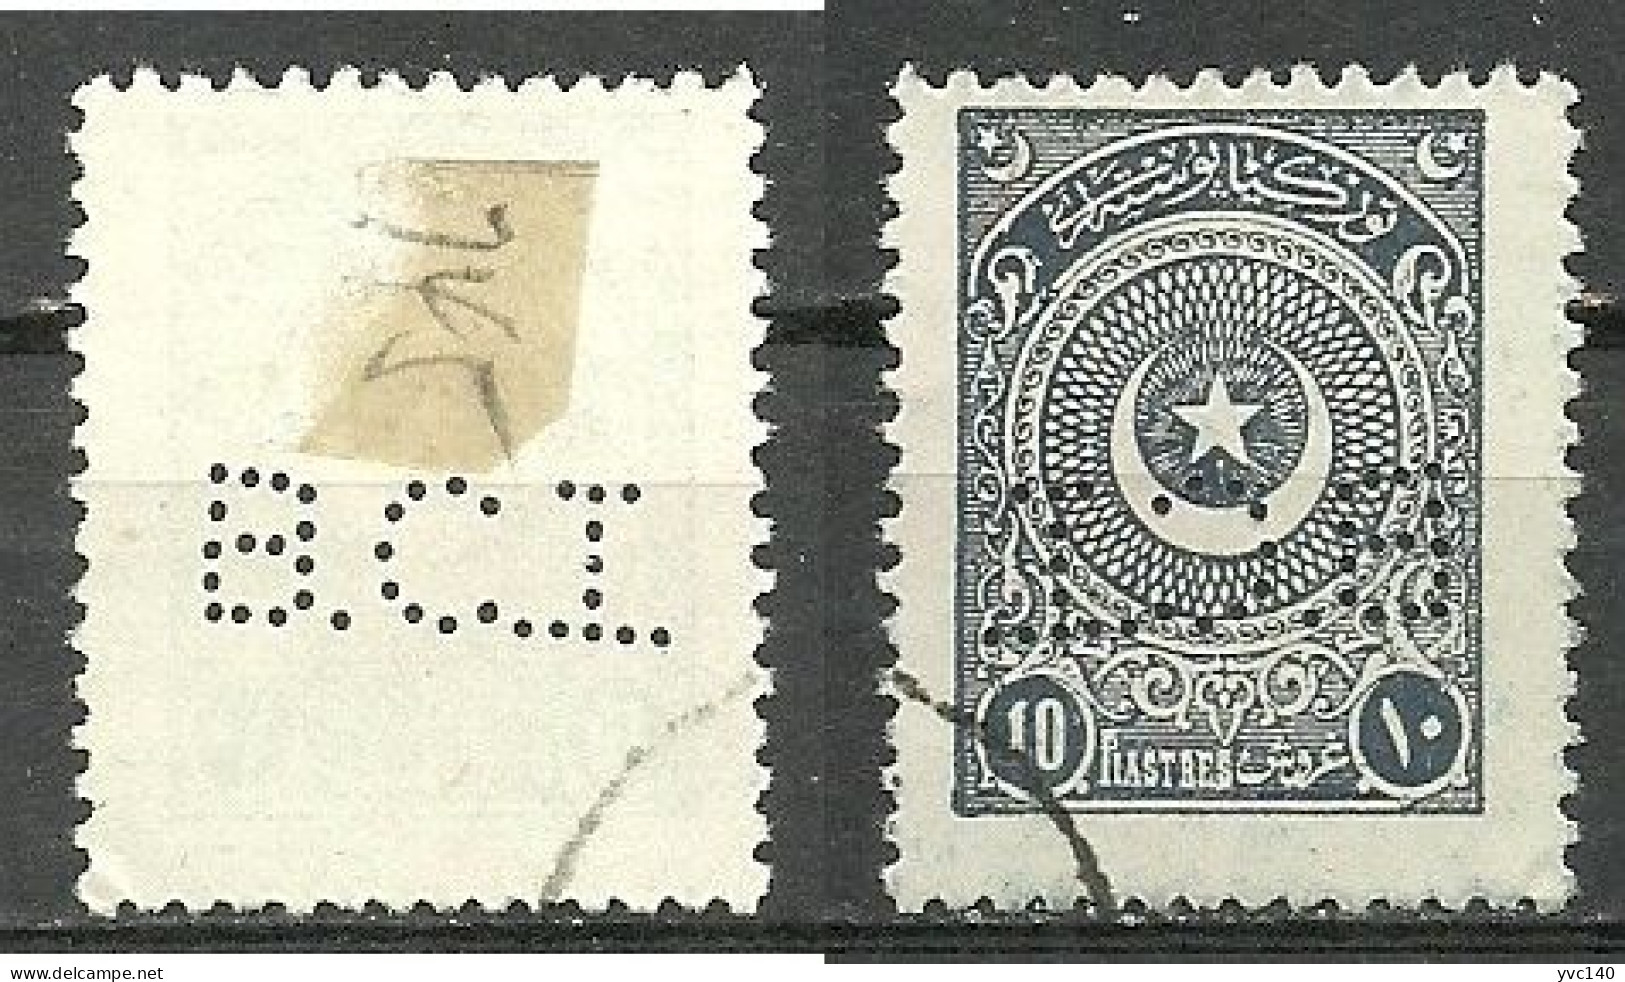 Turkey; 1924 2nd Star&Crescent Issue Stamp 10 K. "Perfin" - Used Stamps